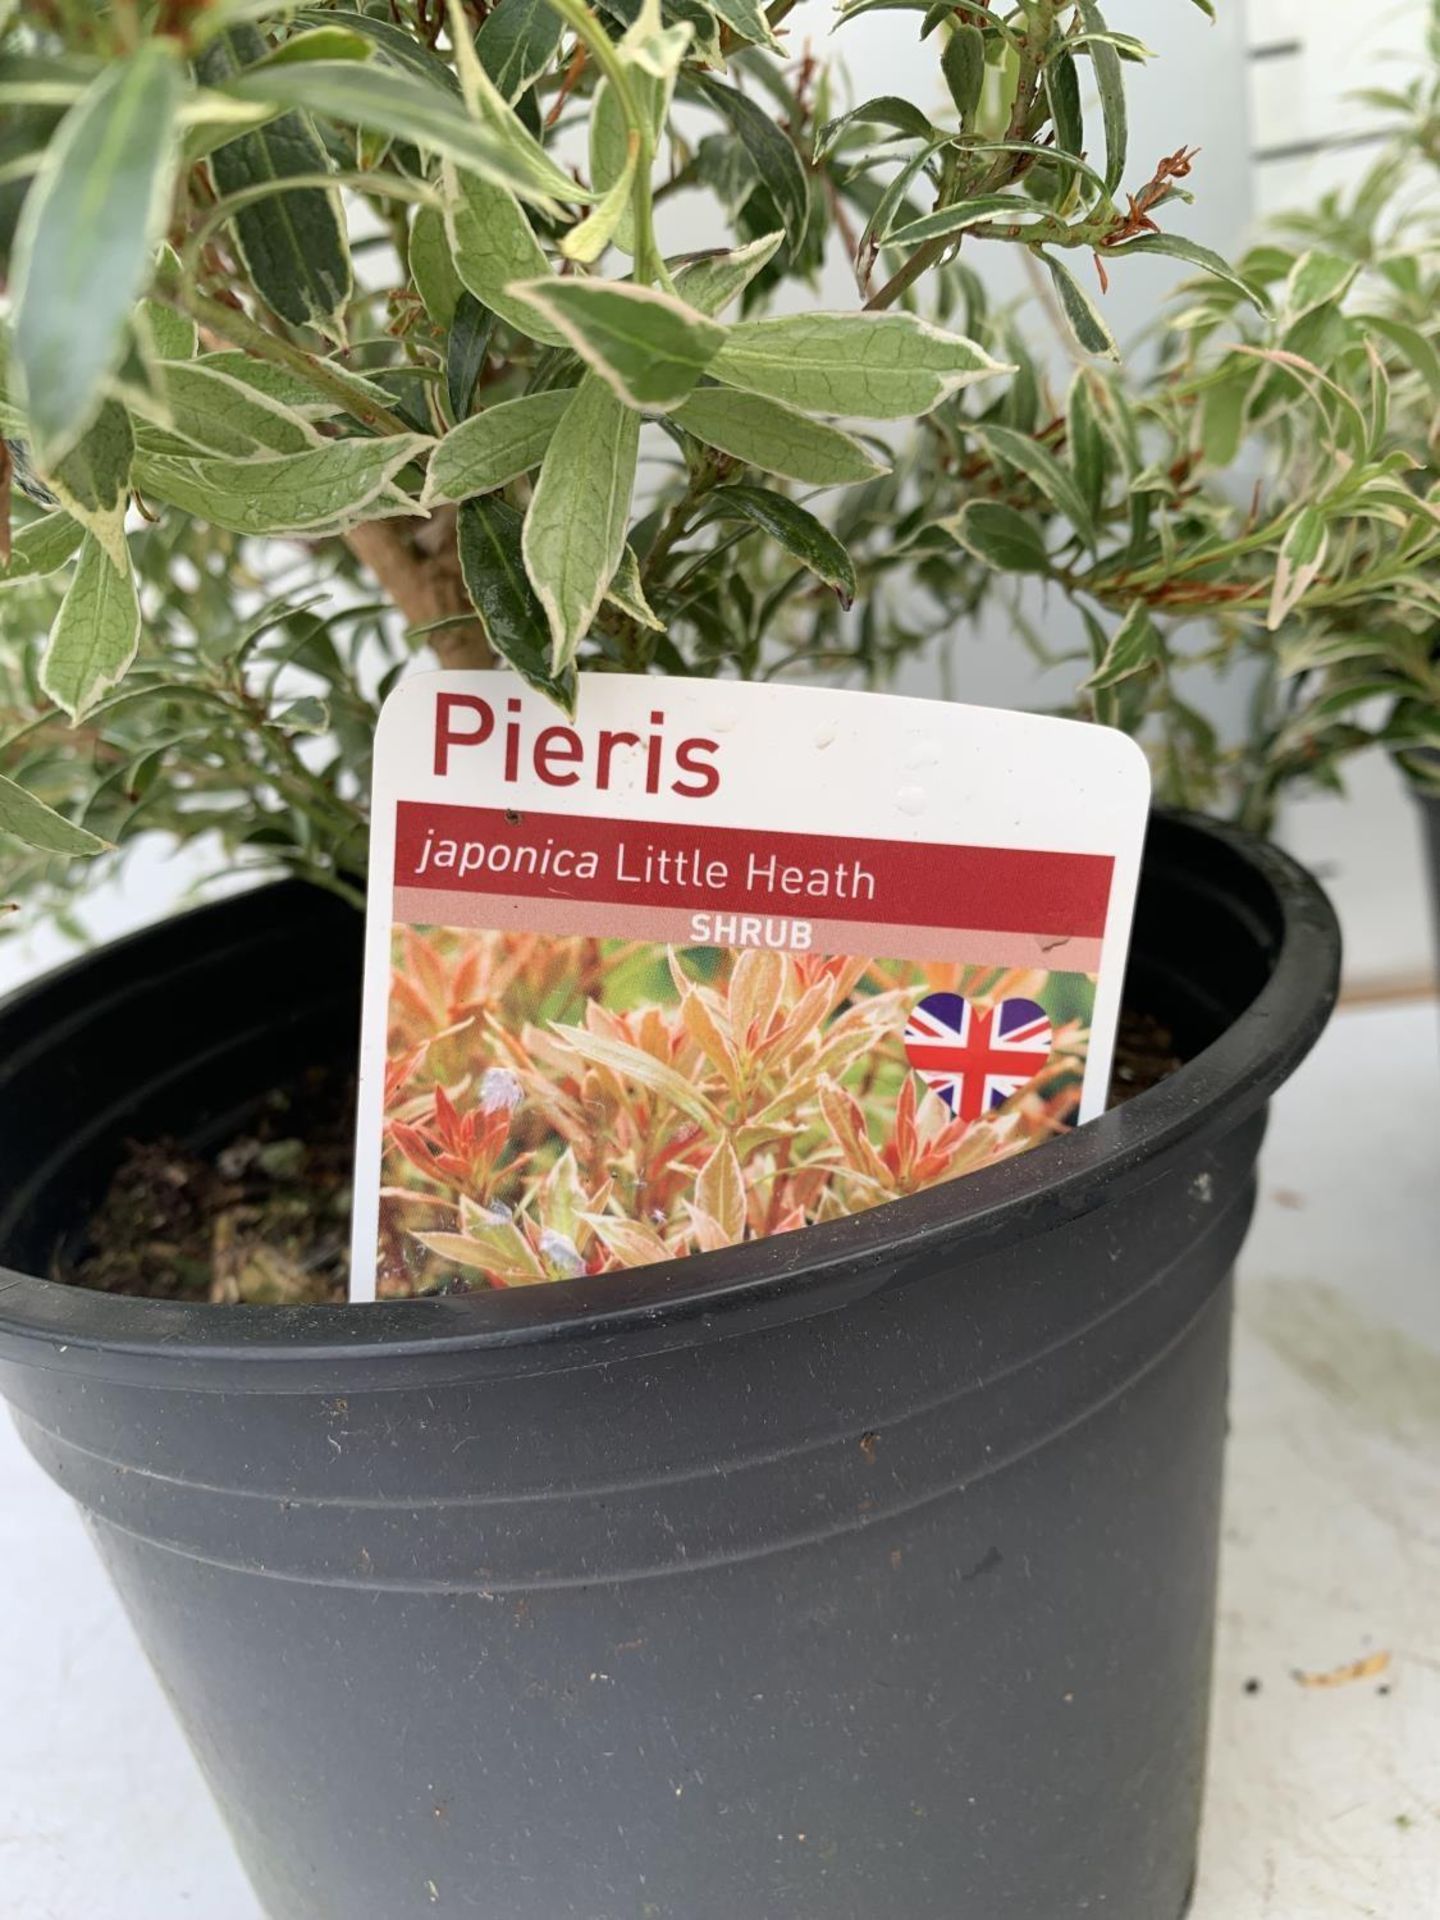 FOUR PIERIS LITTLE HEATH 45CM TALL IN 2 LTR POTS TO BE SOLD FOR THE FOUR PLUS VAT - Image 10 of 10